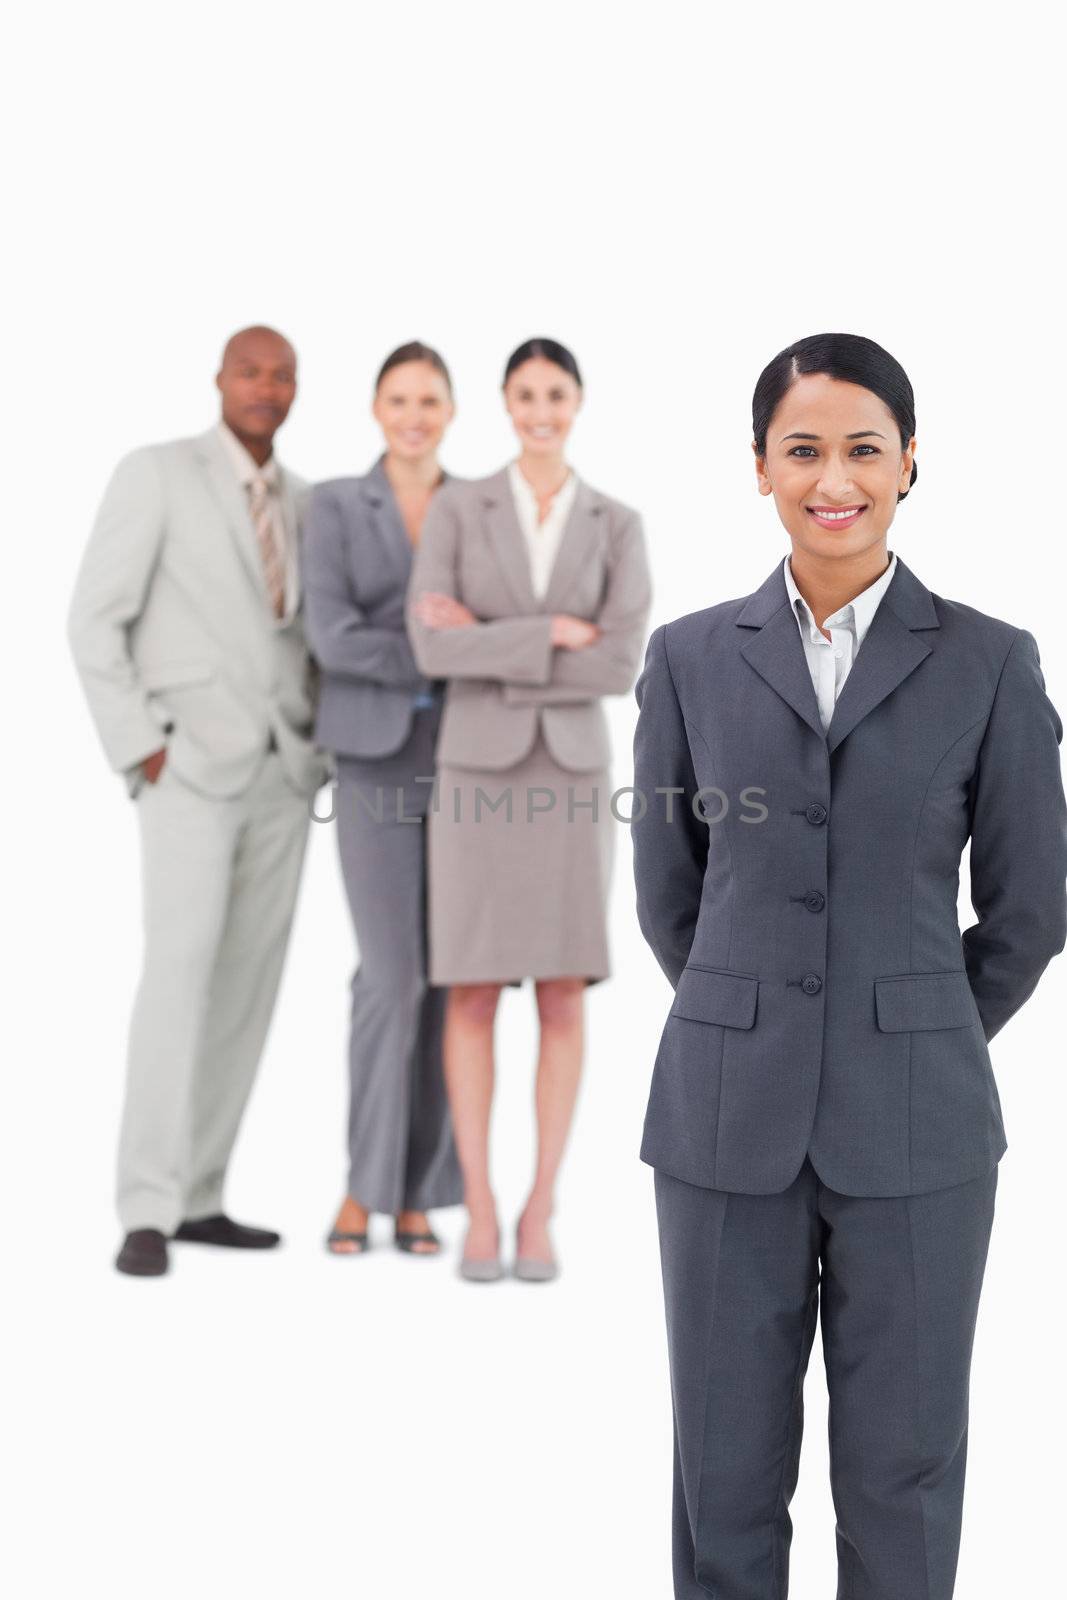 Saleswoman with her team behind her against a white background